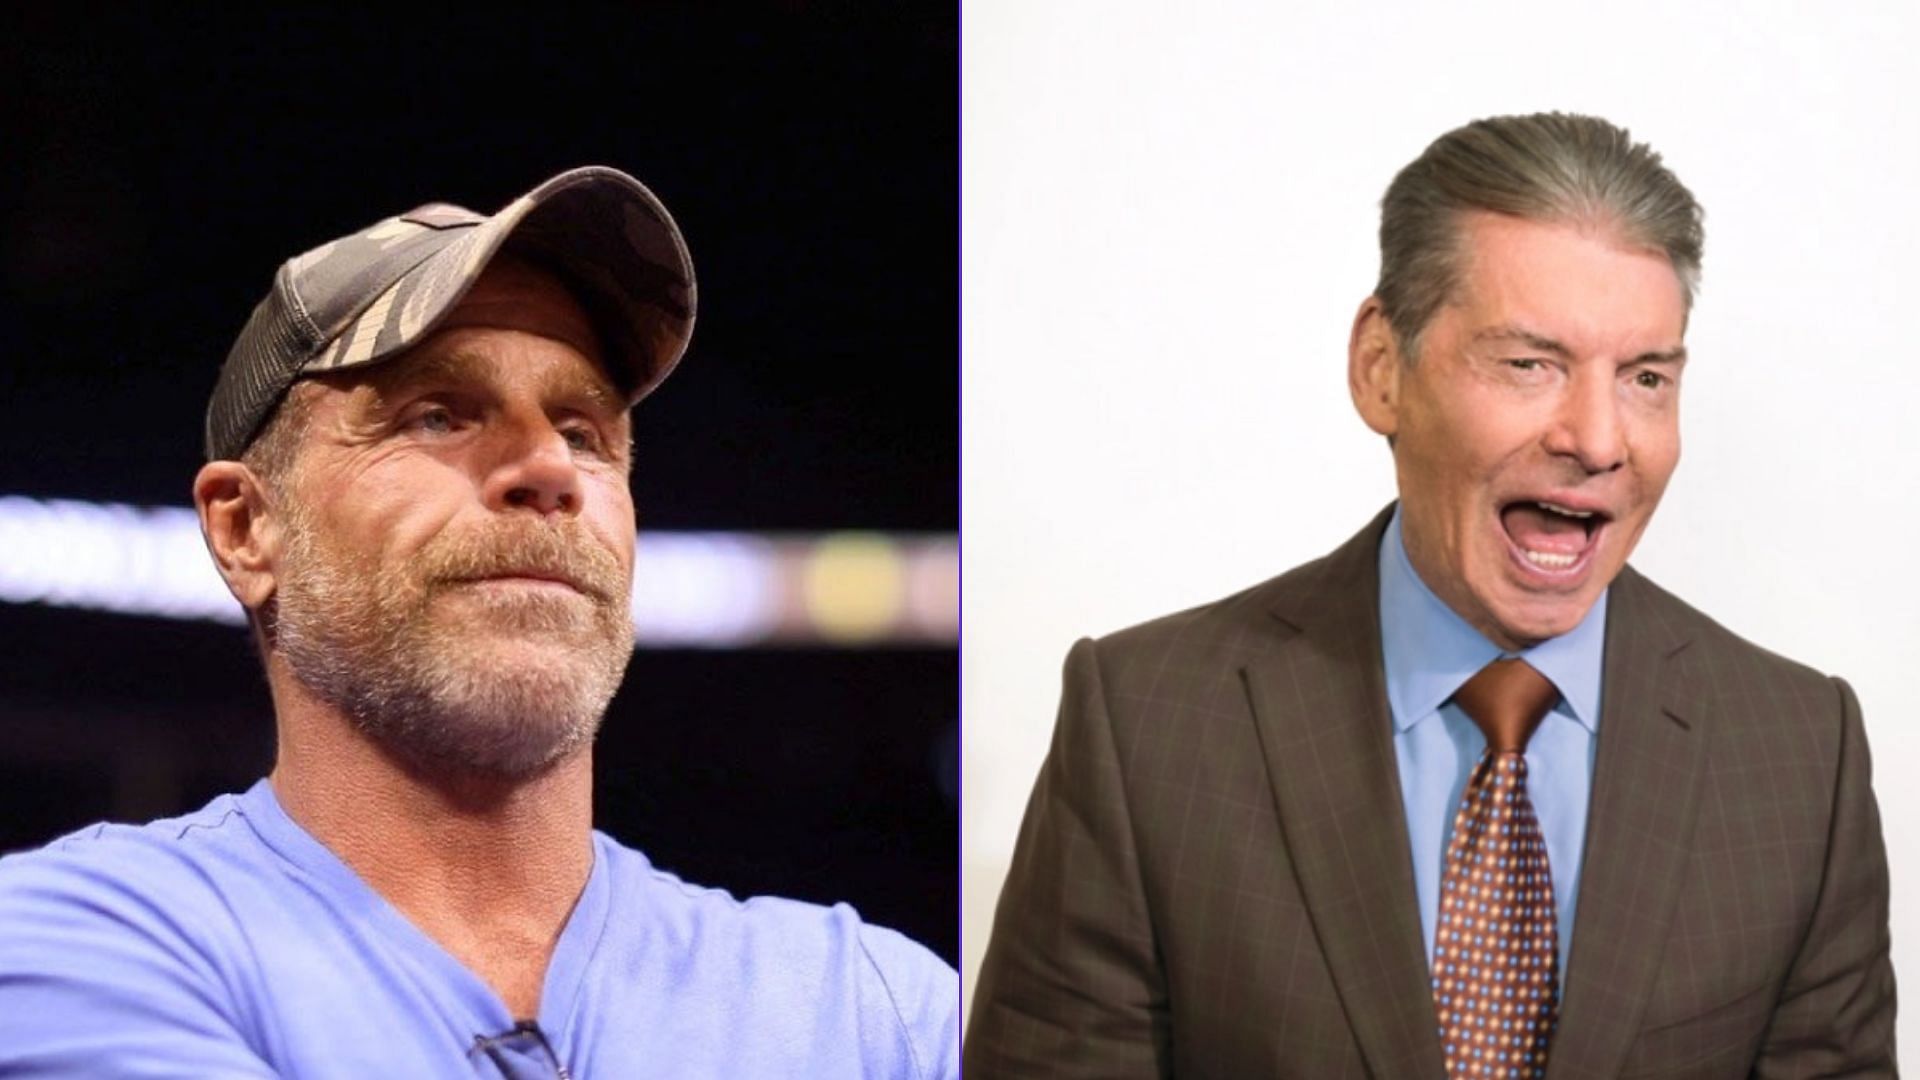 Shawn Michaels spent several years under Vince McMahon